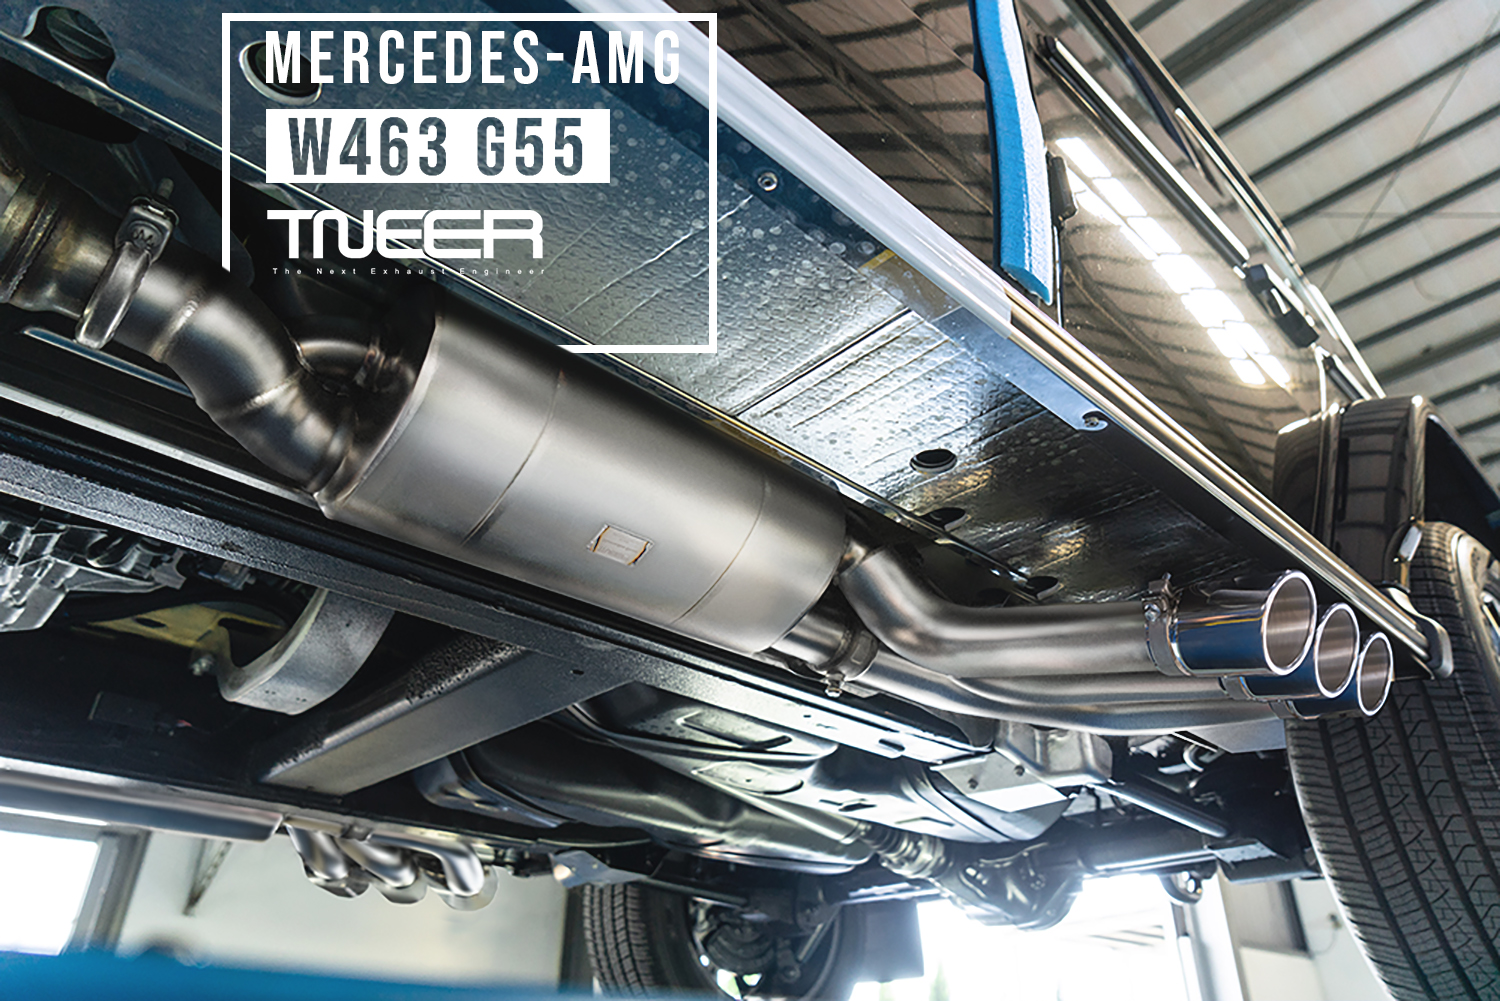 Mercedes-AMG C257 CLS53 LHD TNEER High-Performance Downpipes